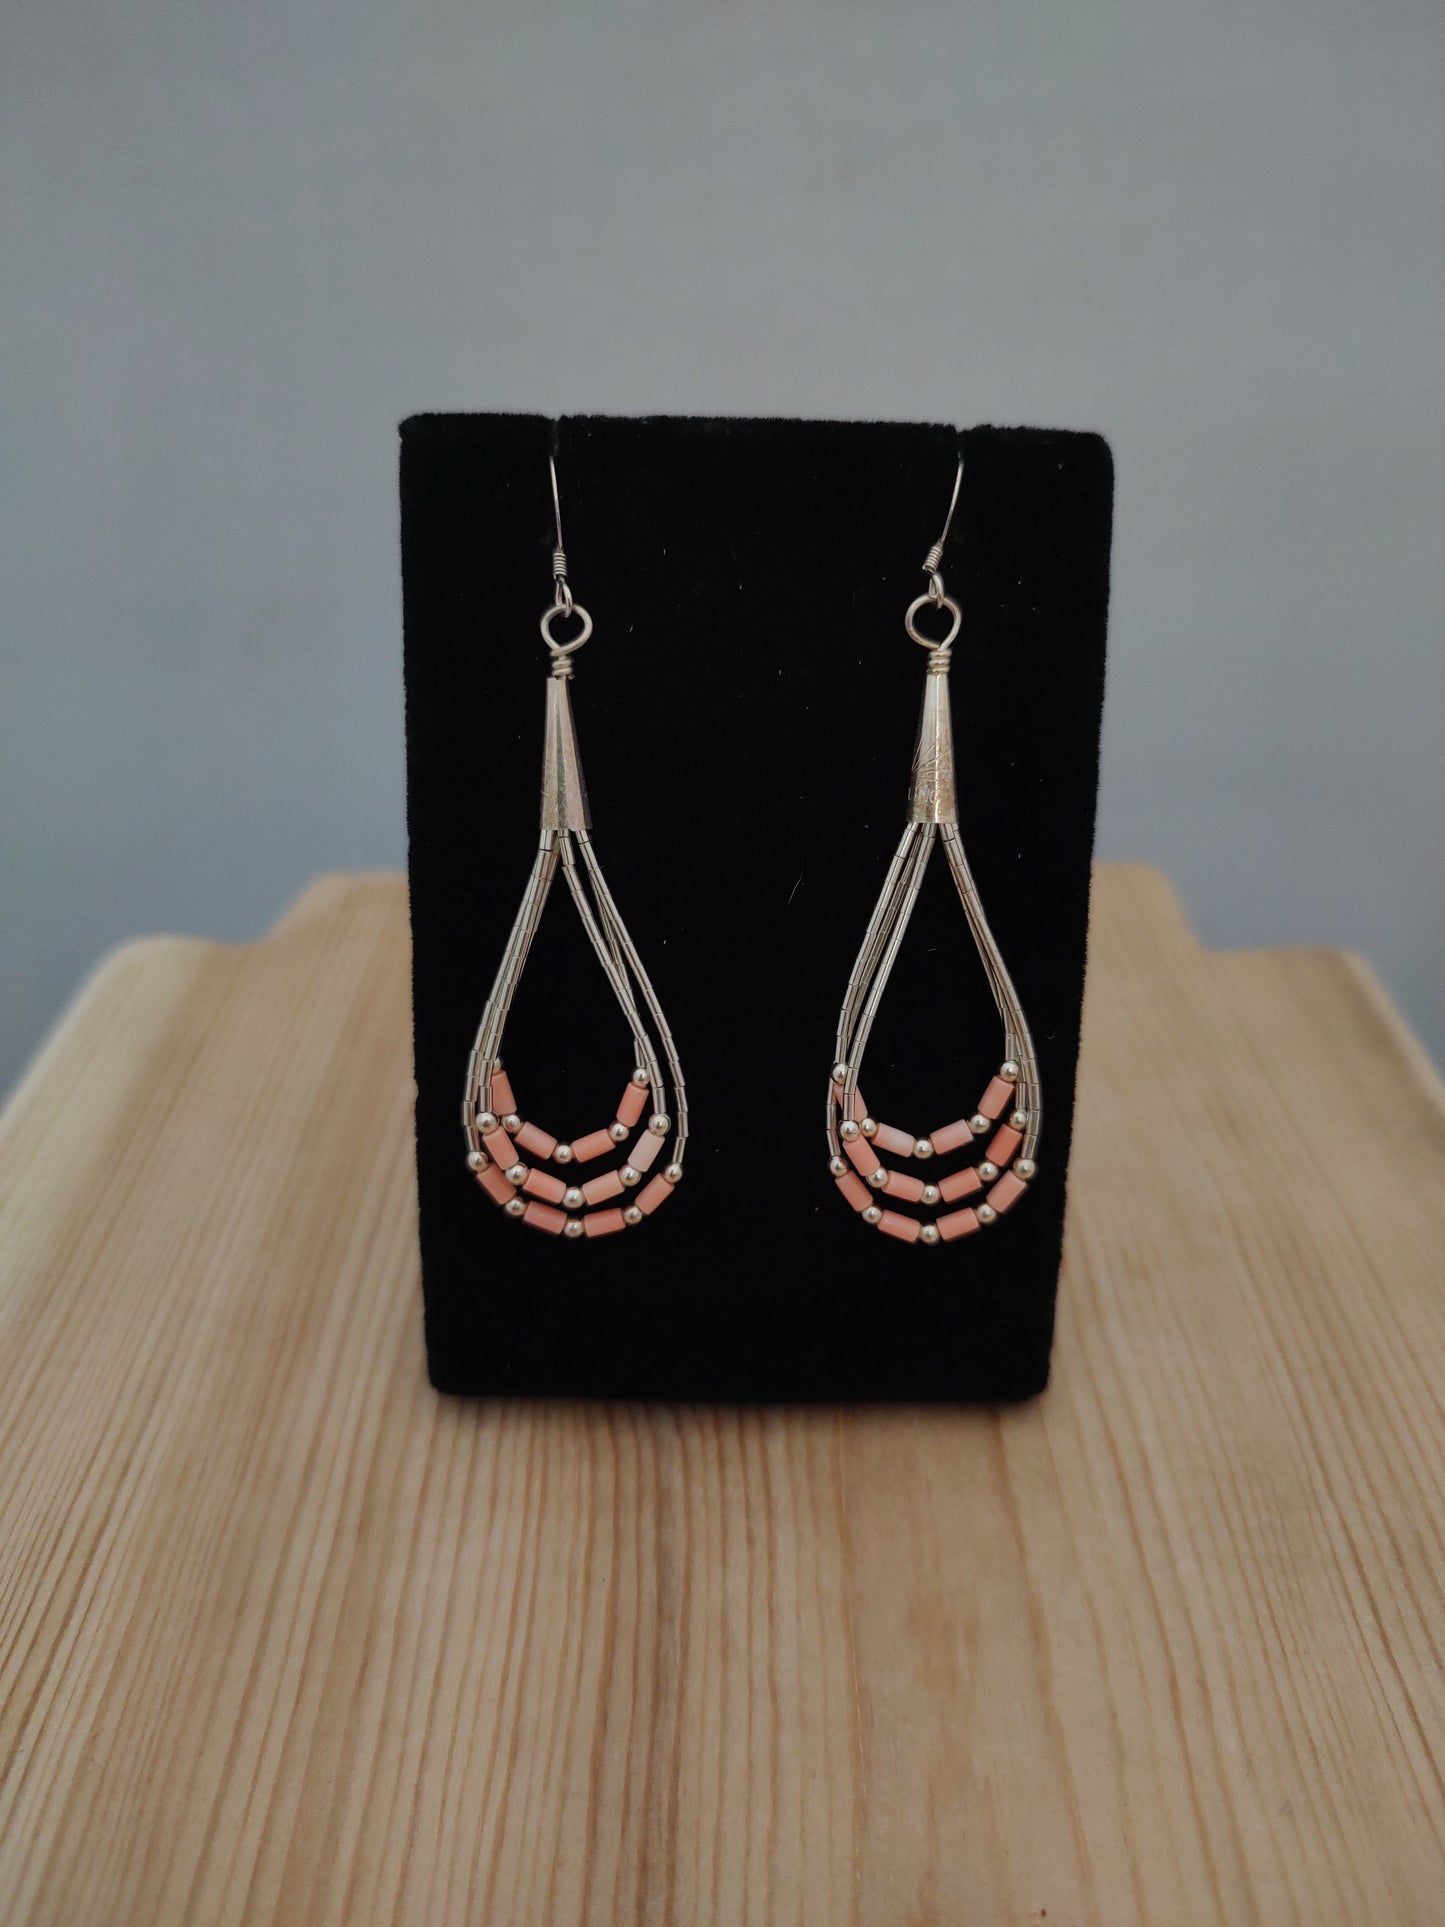 Pink Coral and Silver Beads with Liquid Silver on Hook Earrings